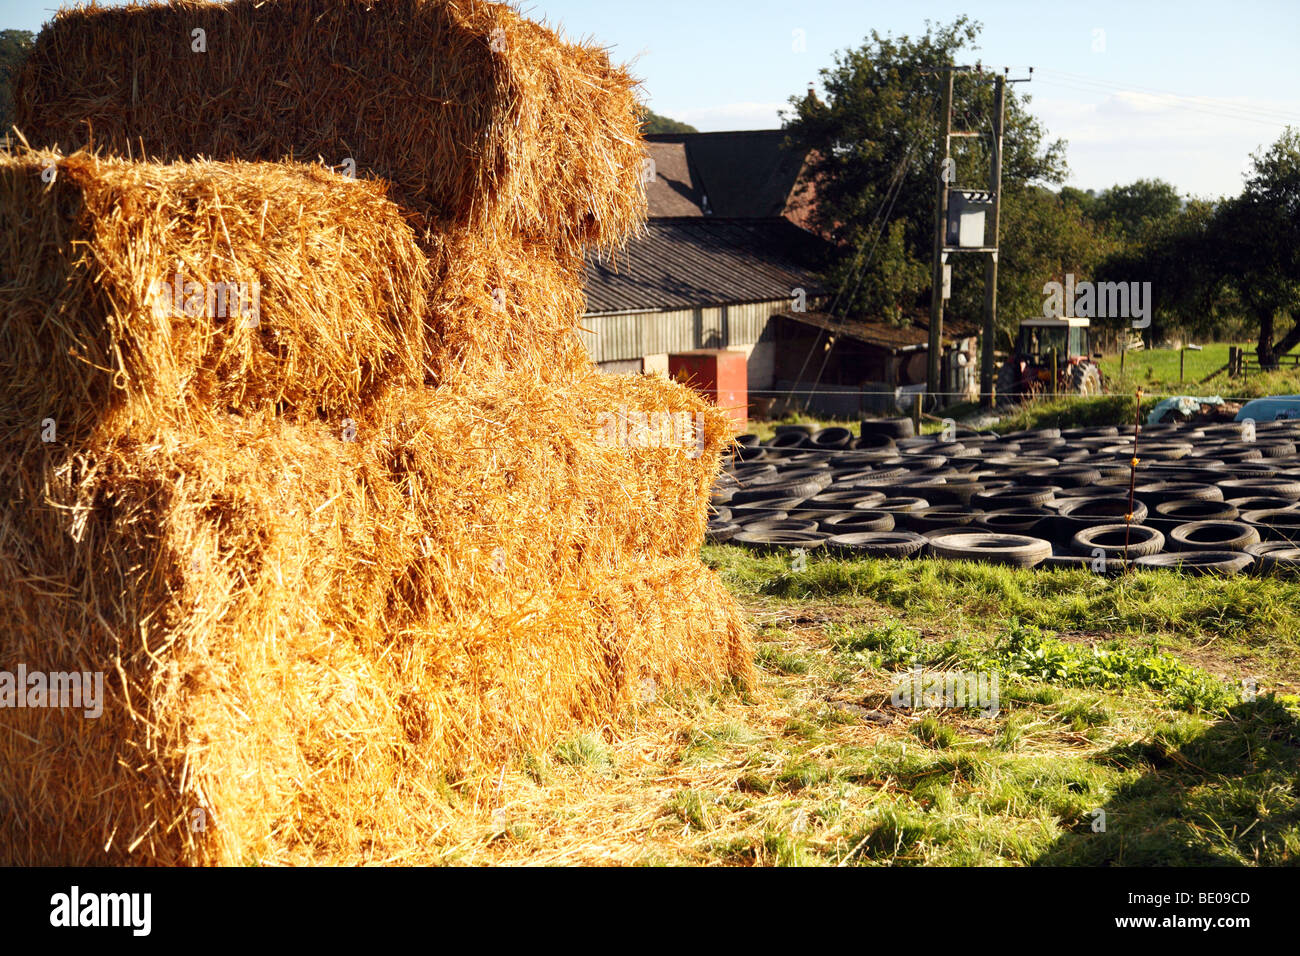 A haystack with a silage pit in the background, covered with old tires tyres Stock Photo